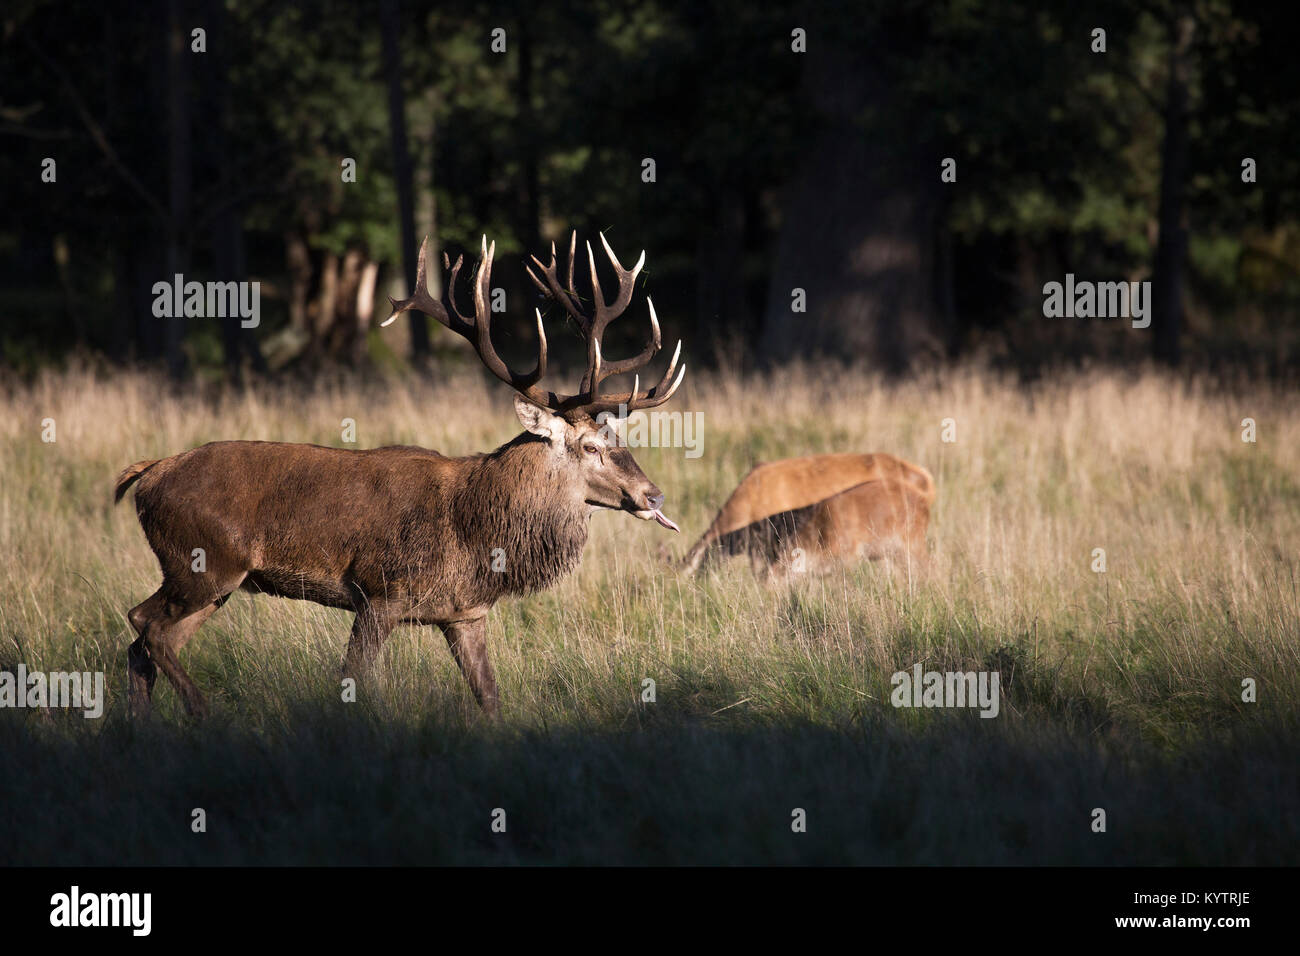 Red deer (Cervus elaphus) stag checking out hinds / females in heat by flicking tongue during the rut in autumn Stock Photo